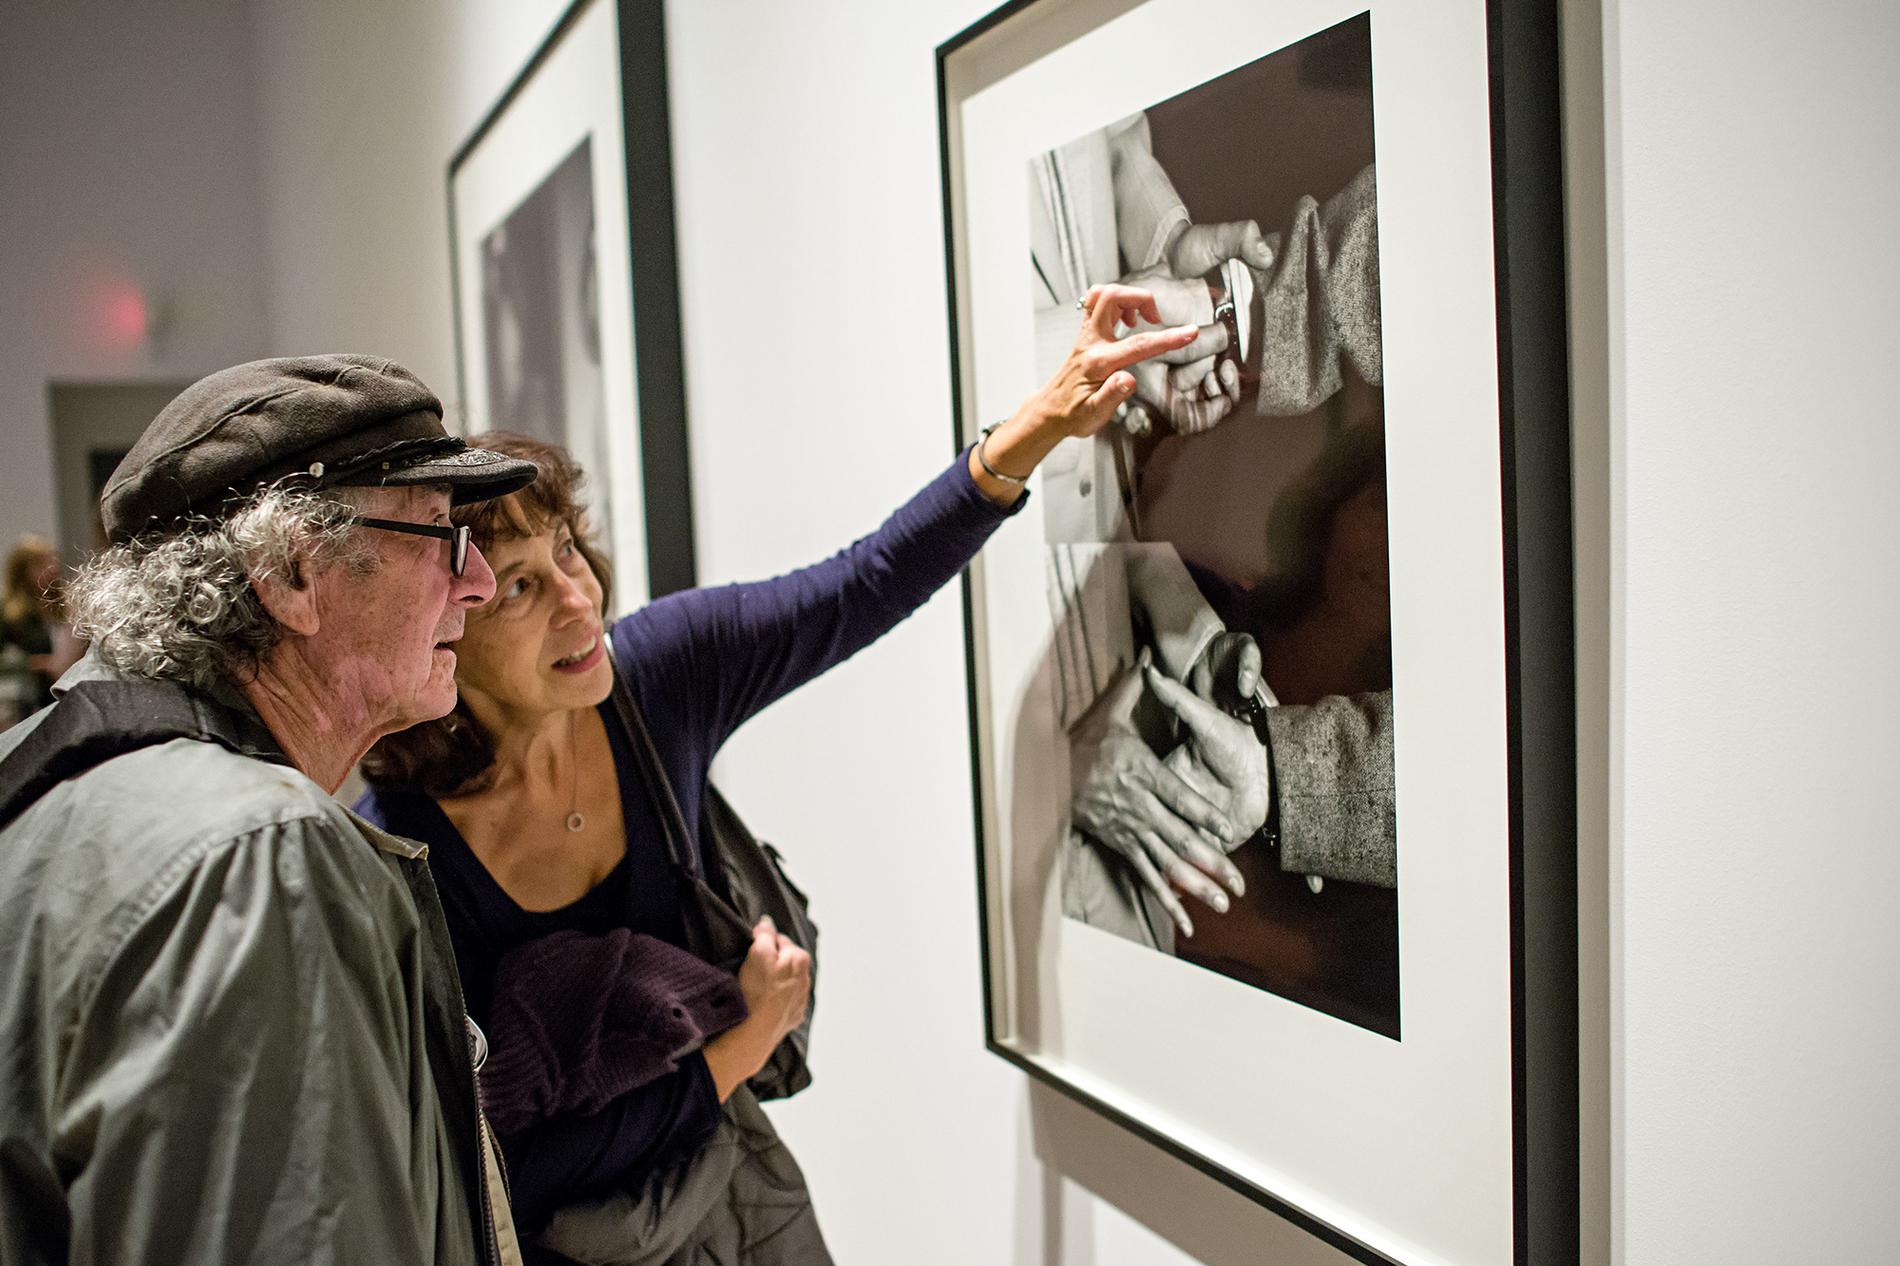 A man and woman looking at a black and white photograph on a wall.